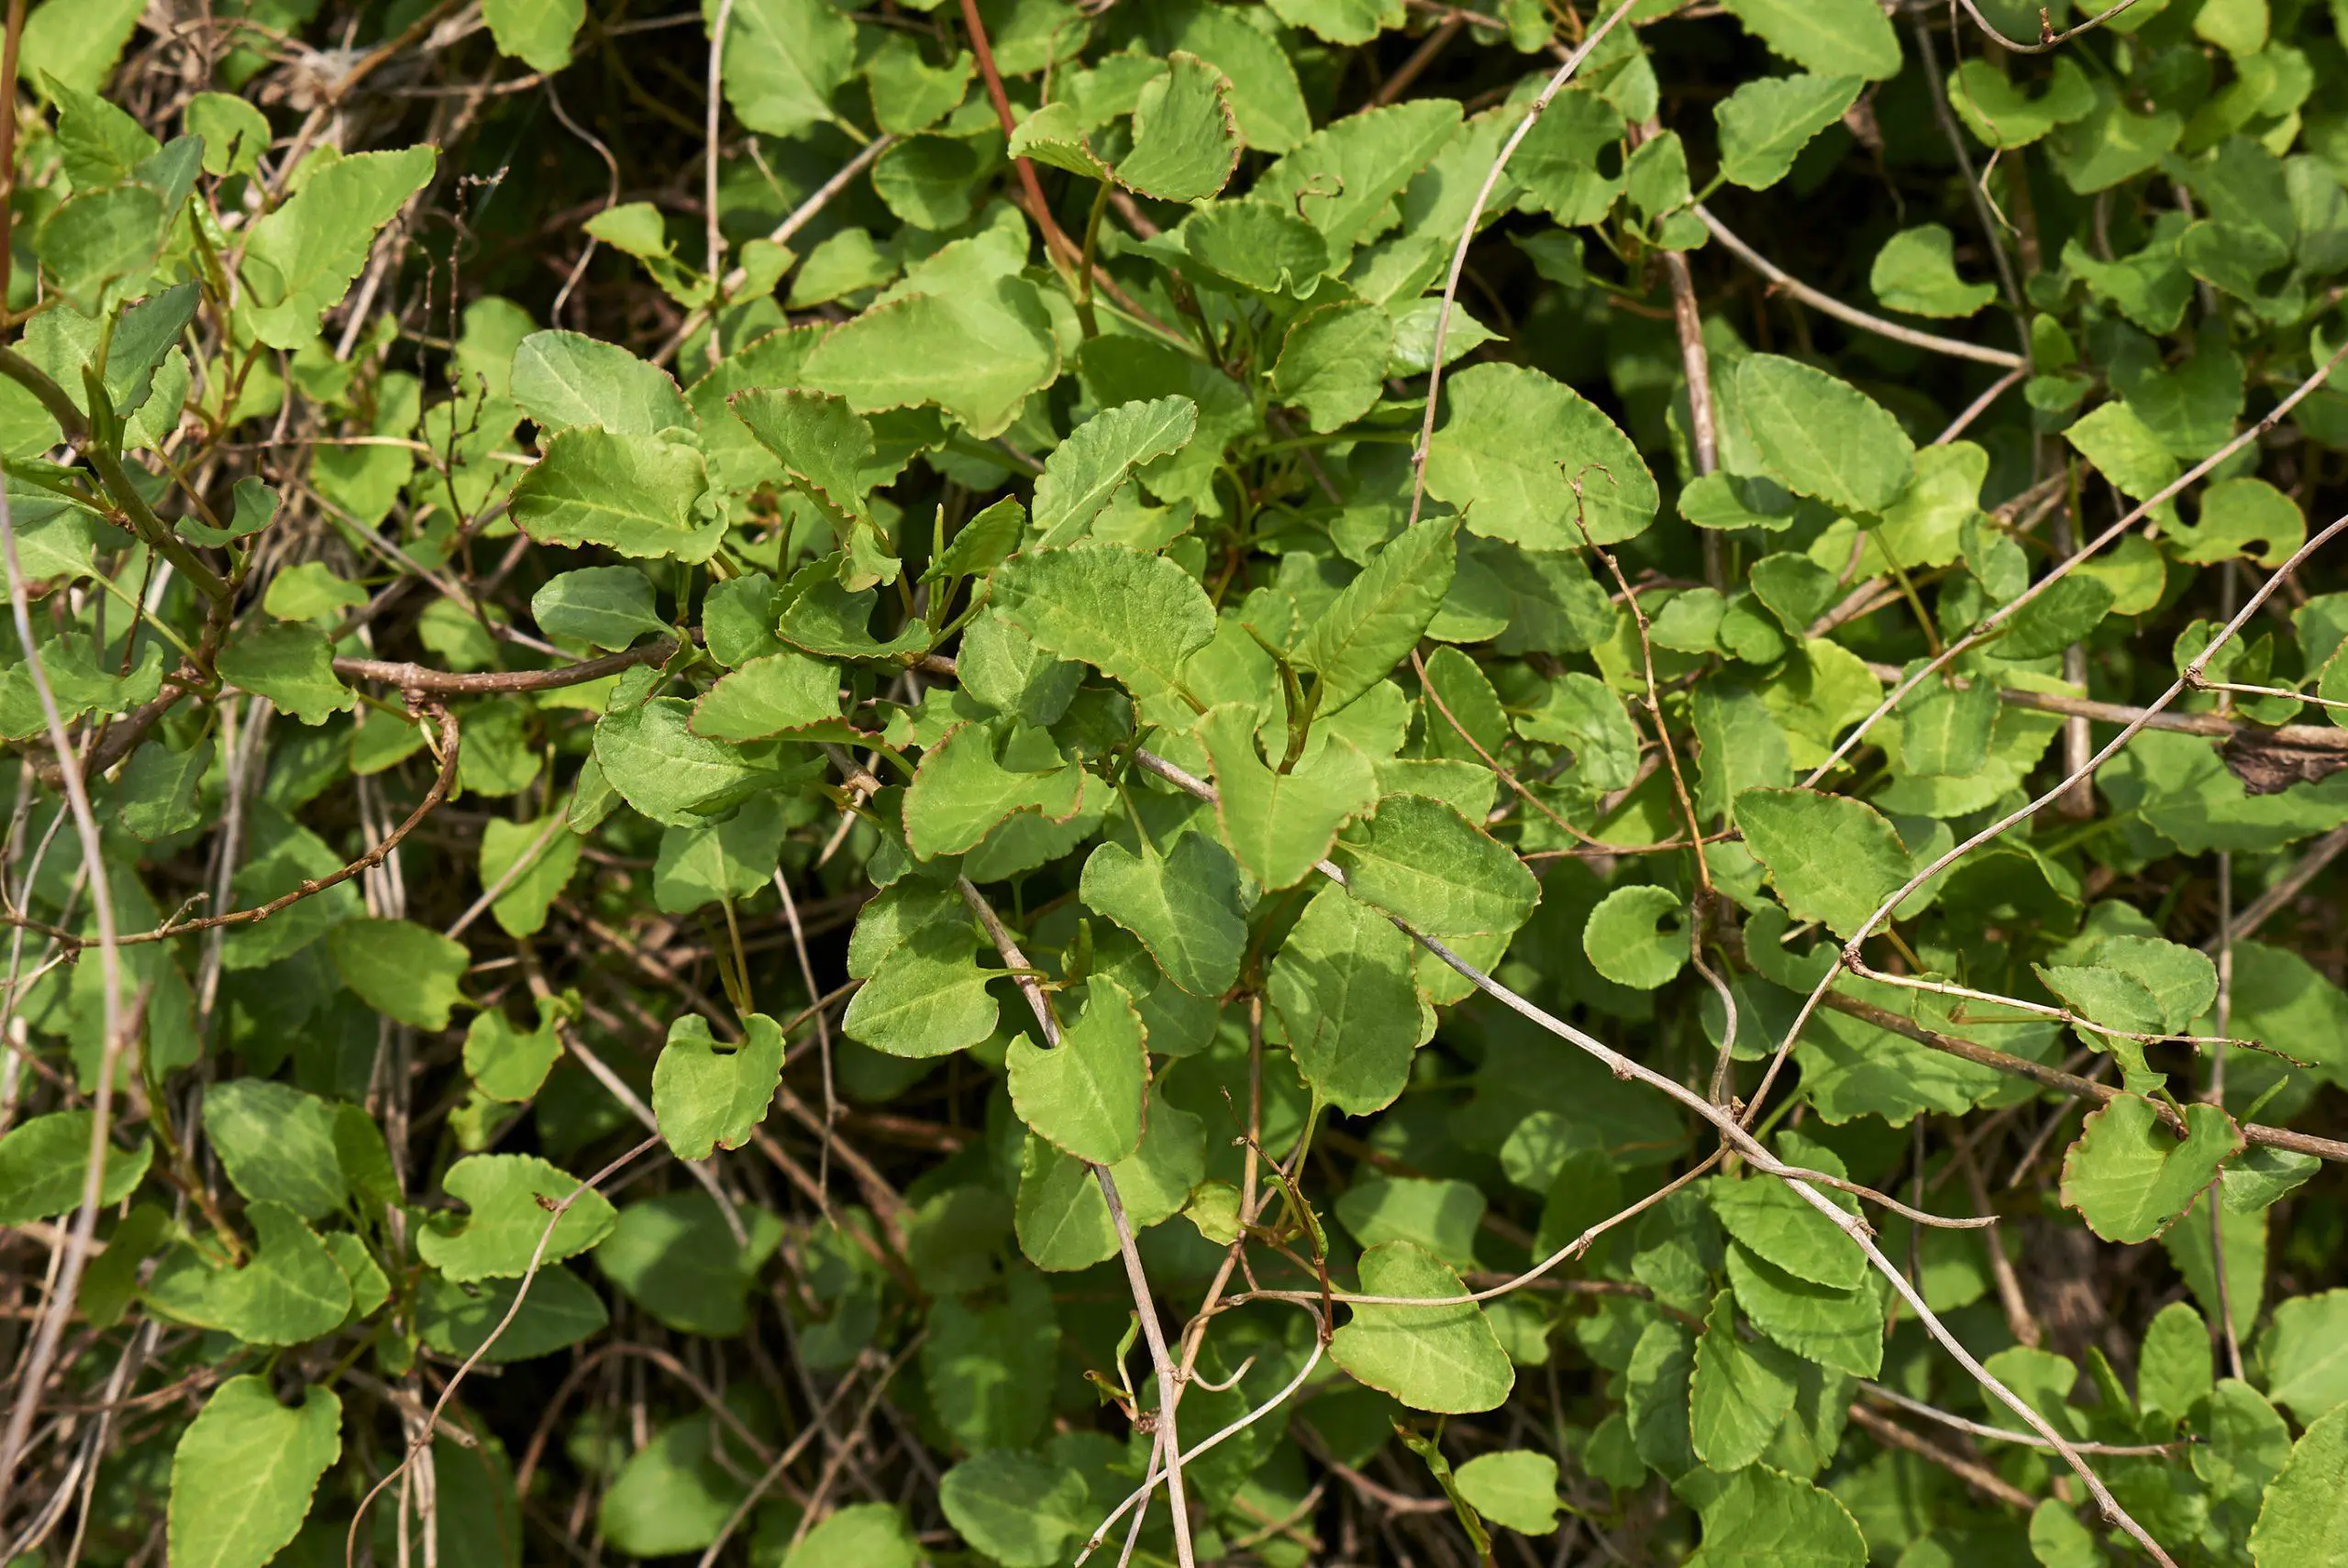 Fresh leaves of Fallopia baldschuanica plant also known as Russian vine consumes an area due to its rapid growth